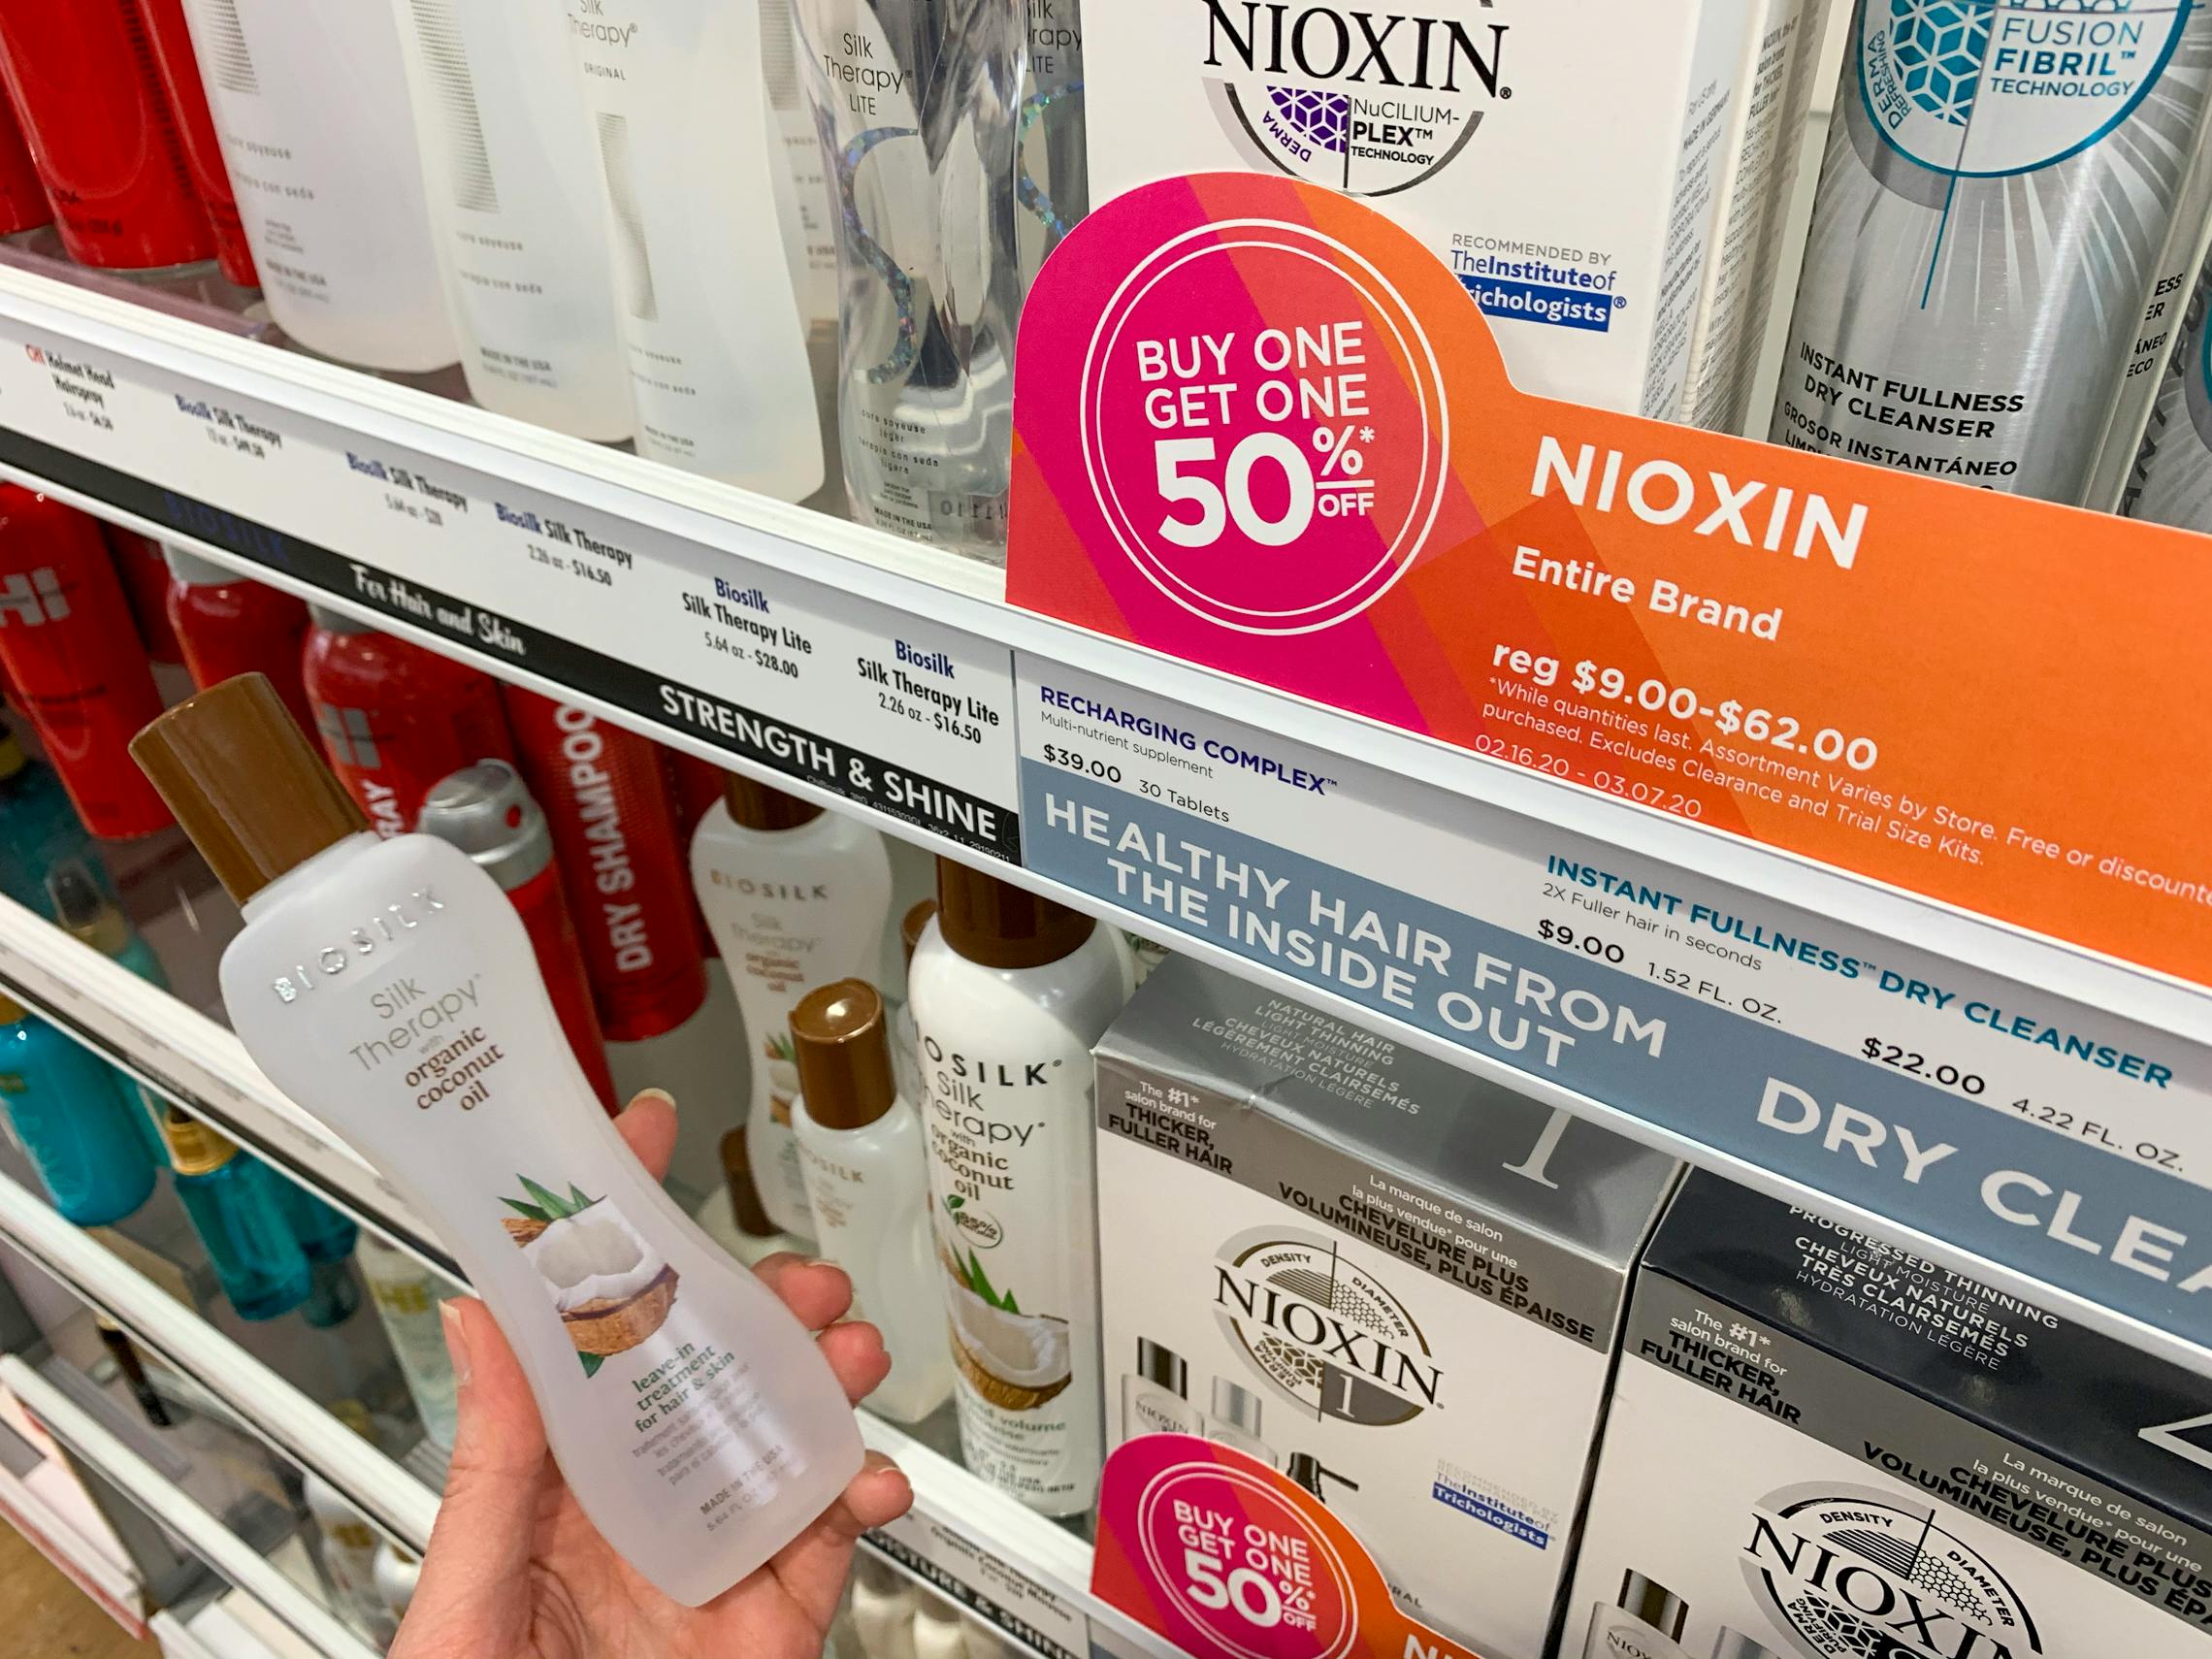 A buy one, get one fifty percent off Nixon hair care sign and products.